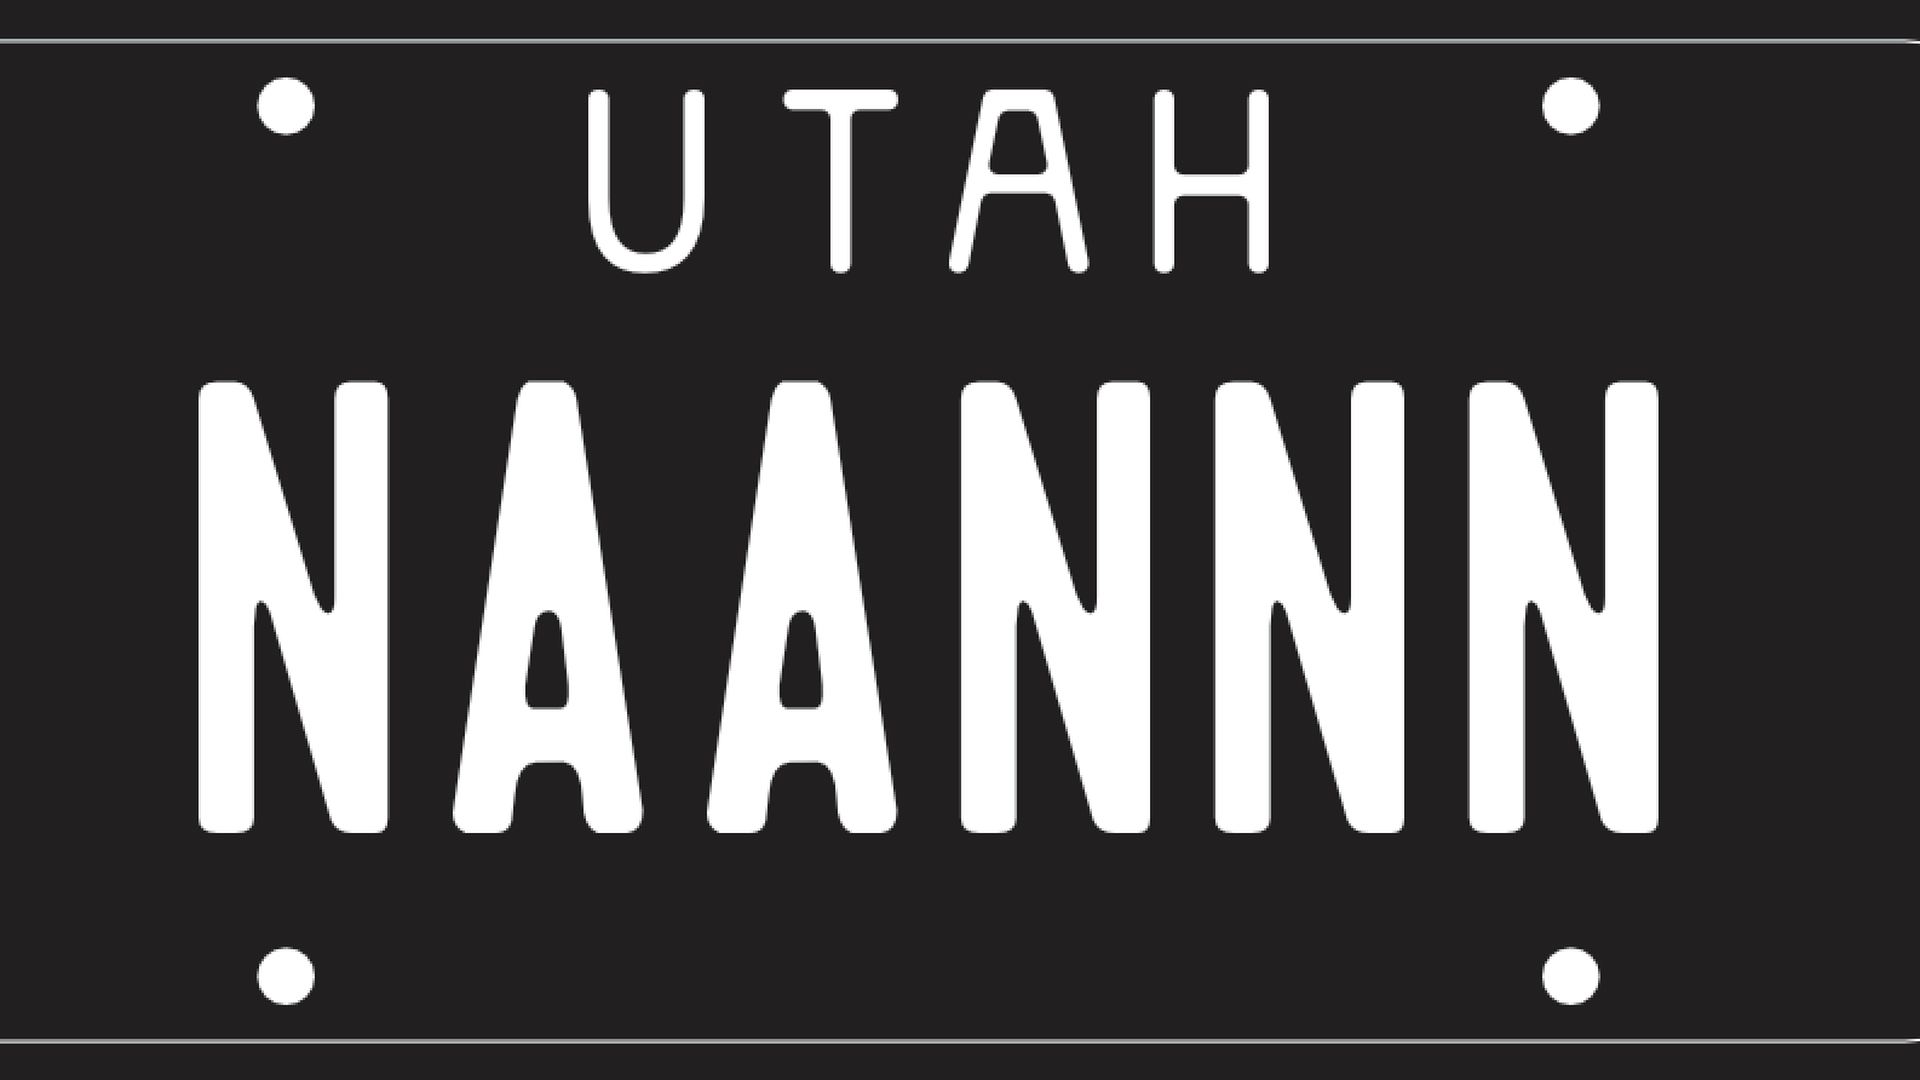 A black and white license plate that says "Utah" and "NAANNN" underneath.